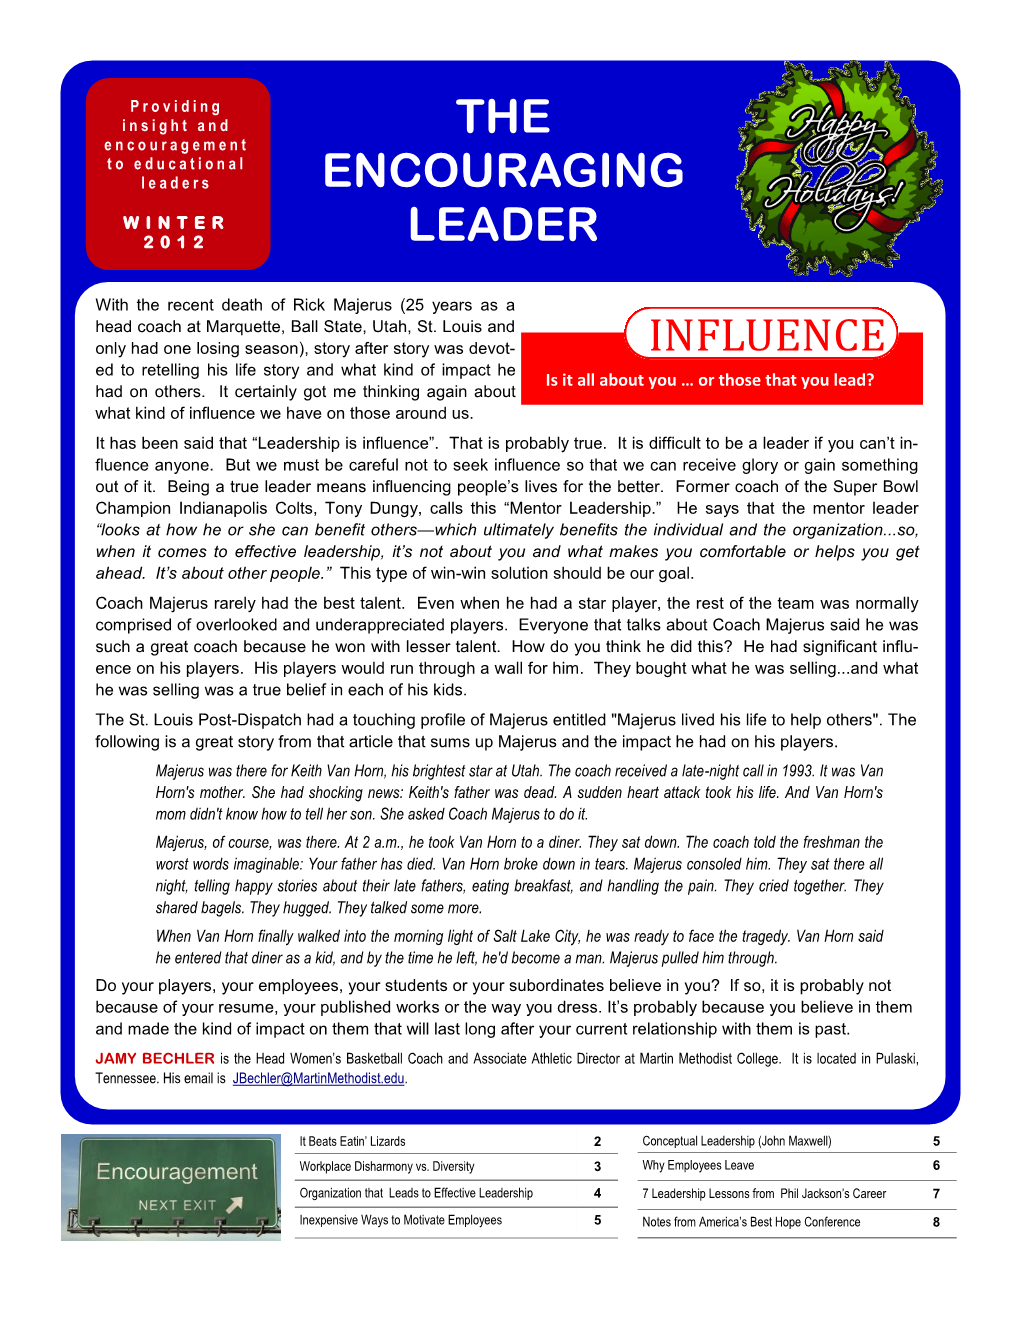 The Encouraging Leader Influence